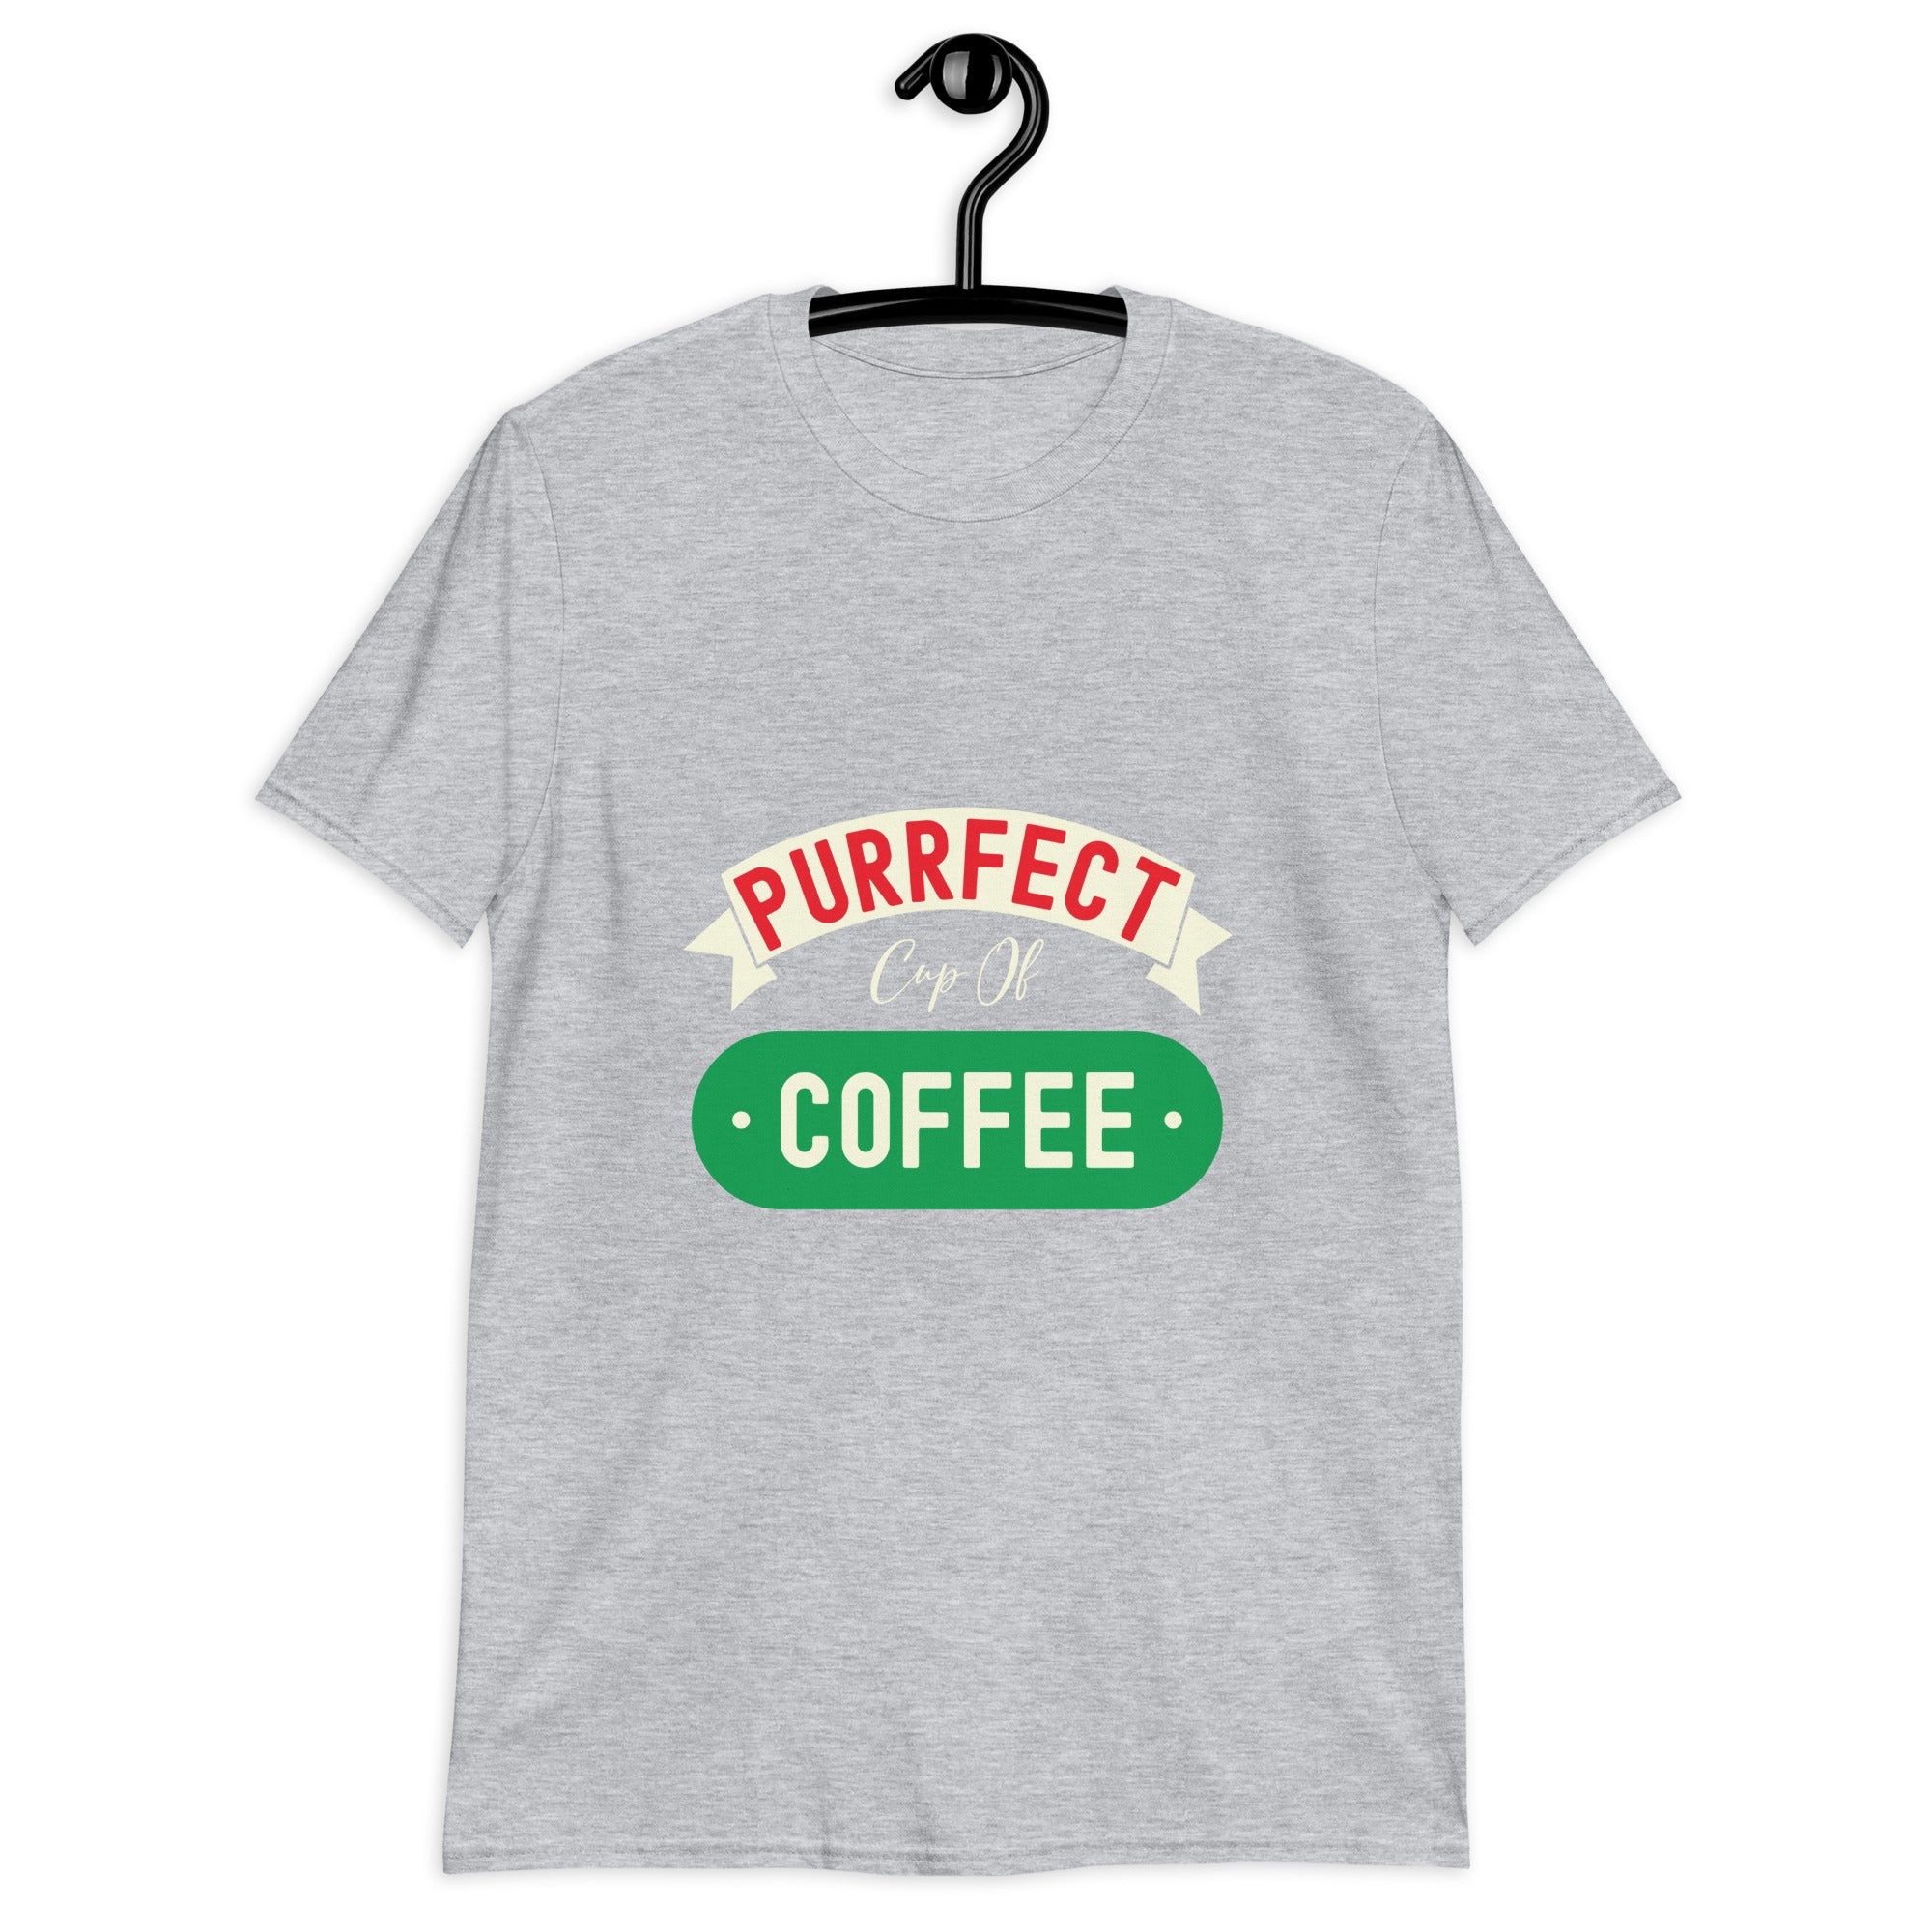 Short-Sleeve Unisex T-Shirt | Purrfect cup of coffee